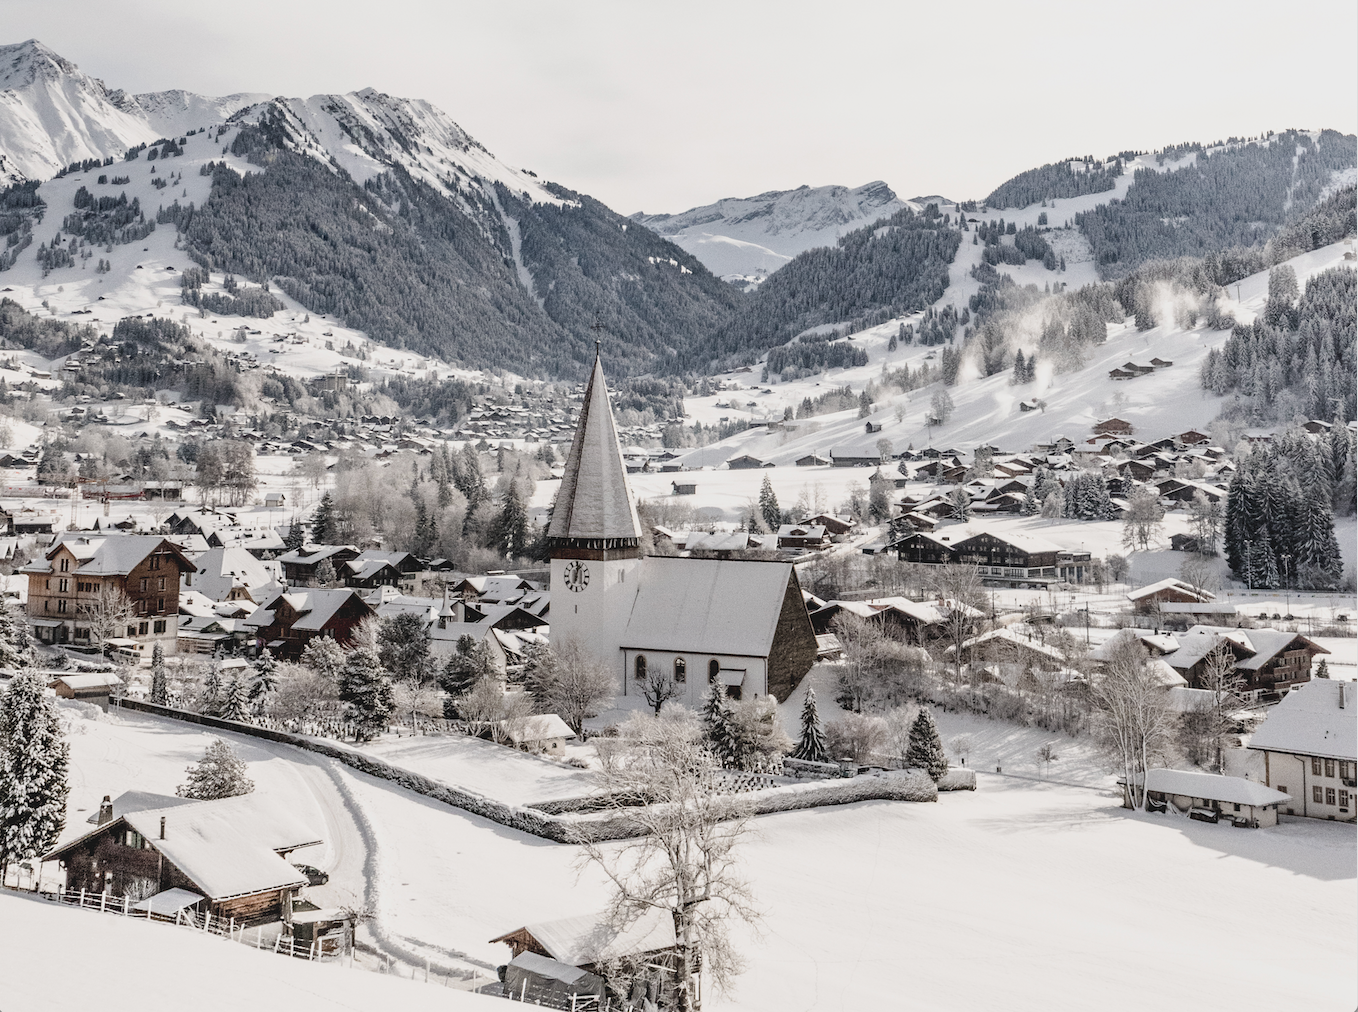 A Luxury Weekend Guide to Gstaad - Elite Traveler